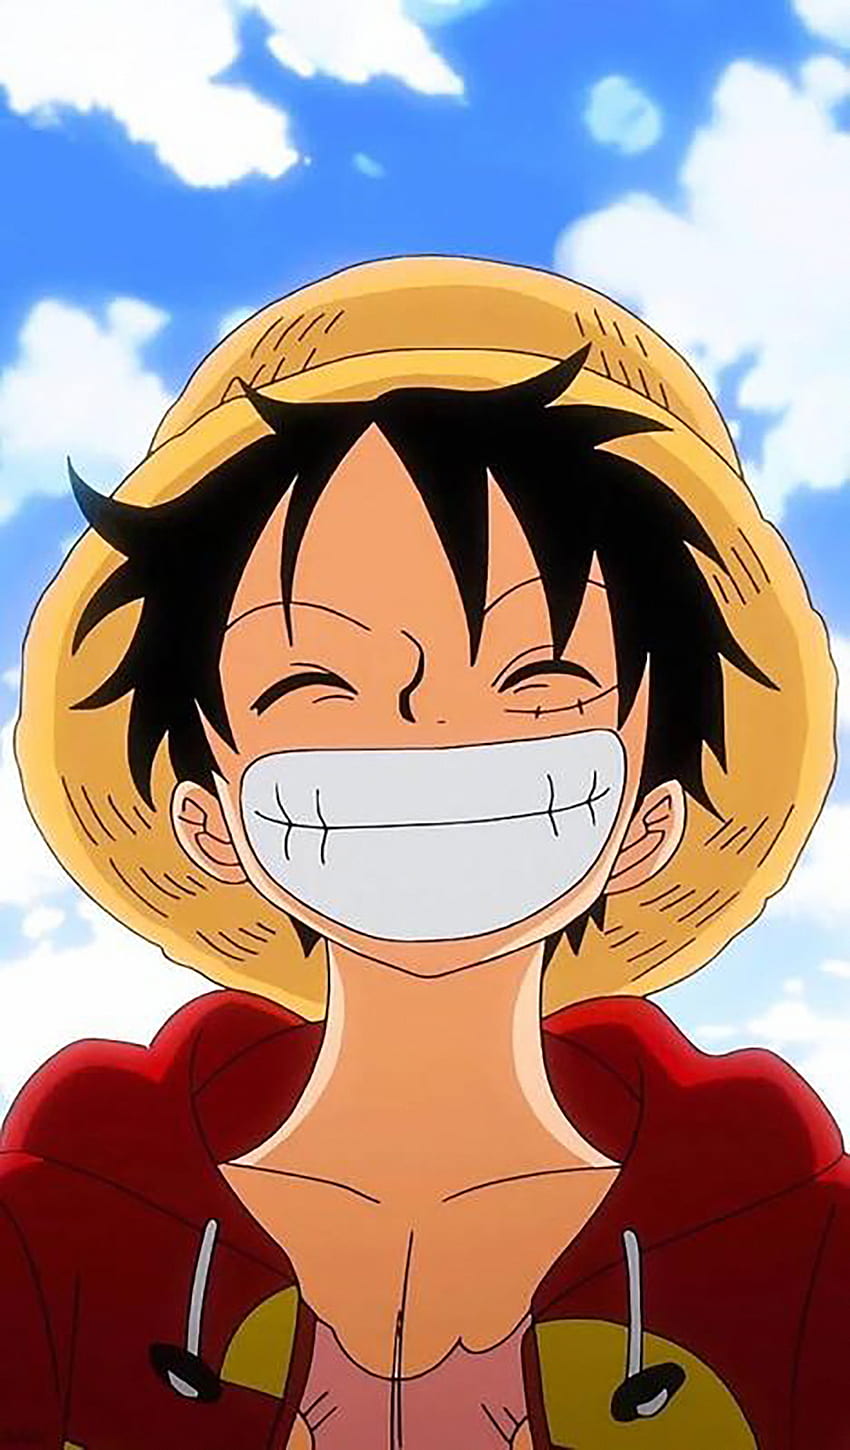 Masque 'Luffy Smiling - One Piece' oleh Lilzer99 di tahun 2020. Anime , Anime, One piece manga, Luffy Smile wallpaper ponsel HD